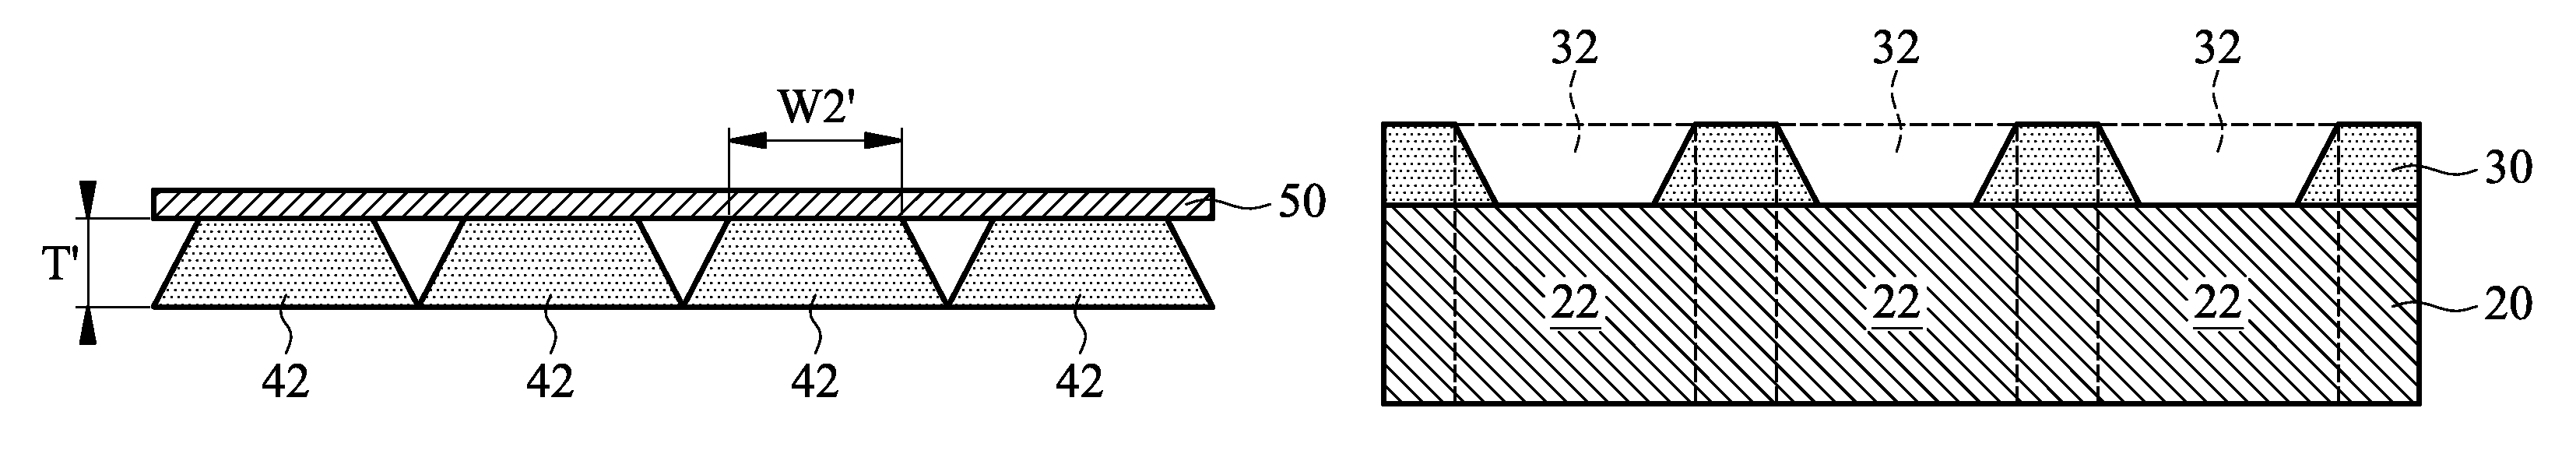 Component stacking using pre-formed adhesive films